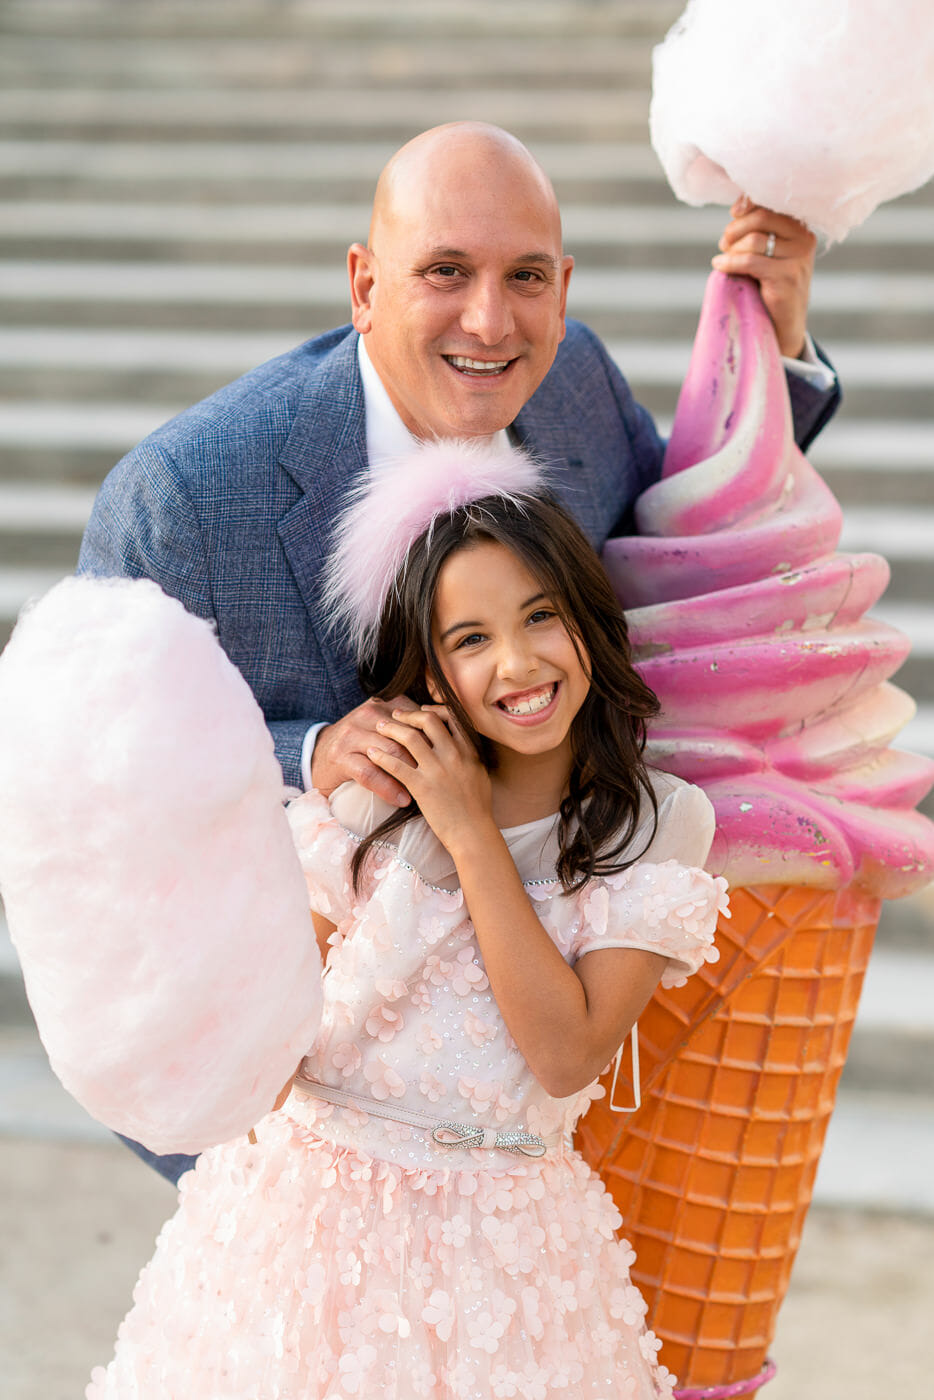 Cute Dad and Daughter Paris family portrait with massive pink cotton candy as prop